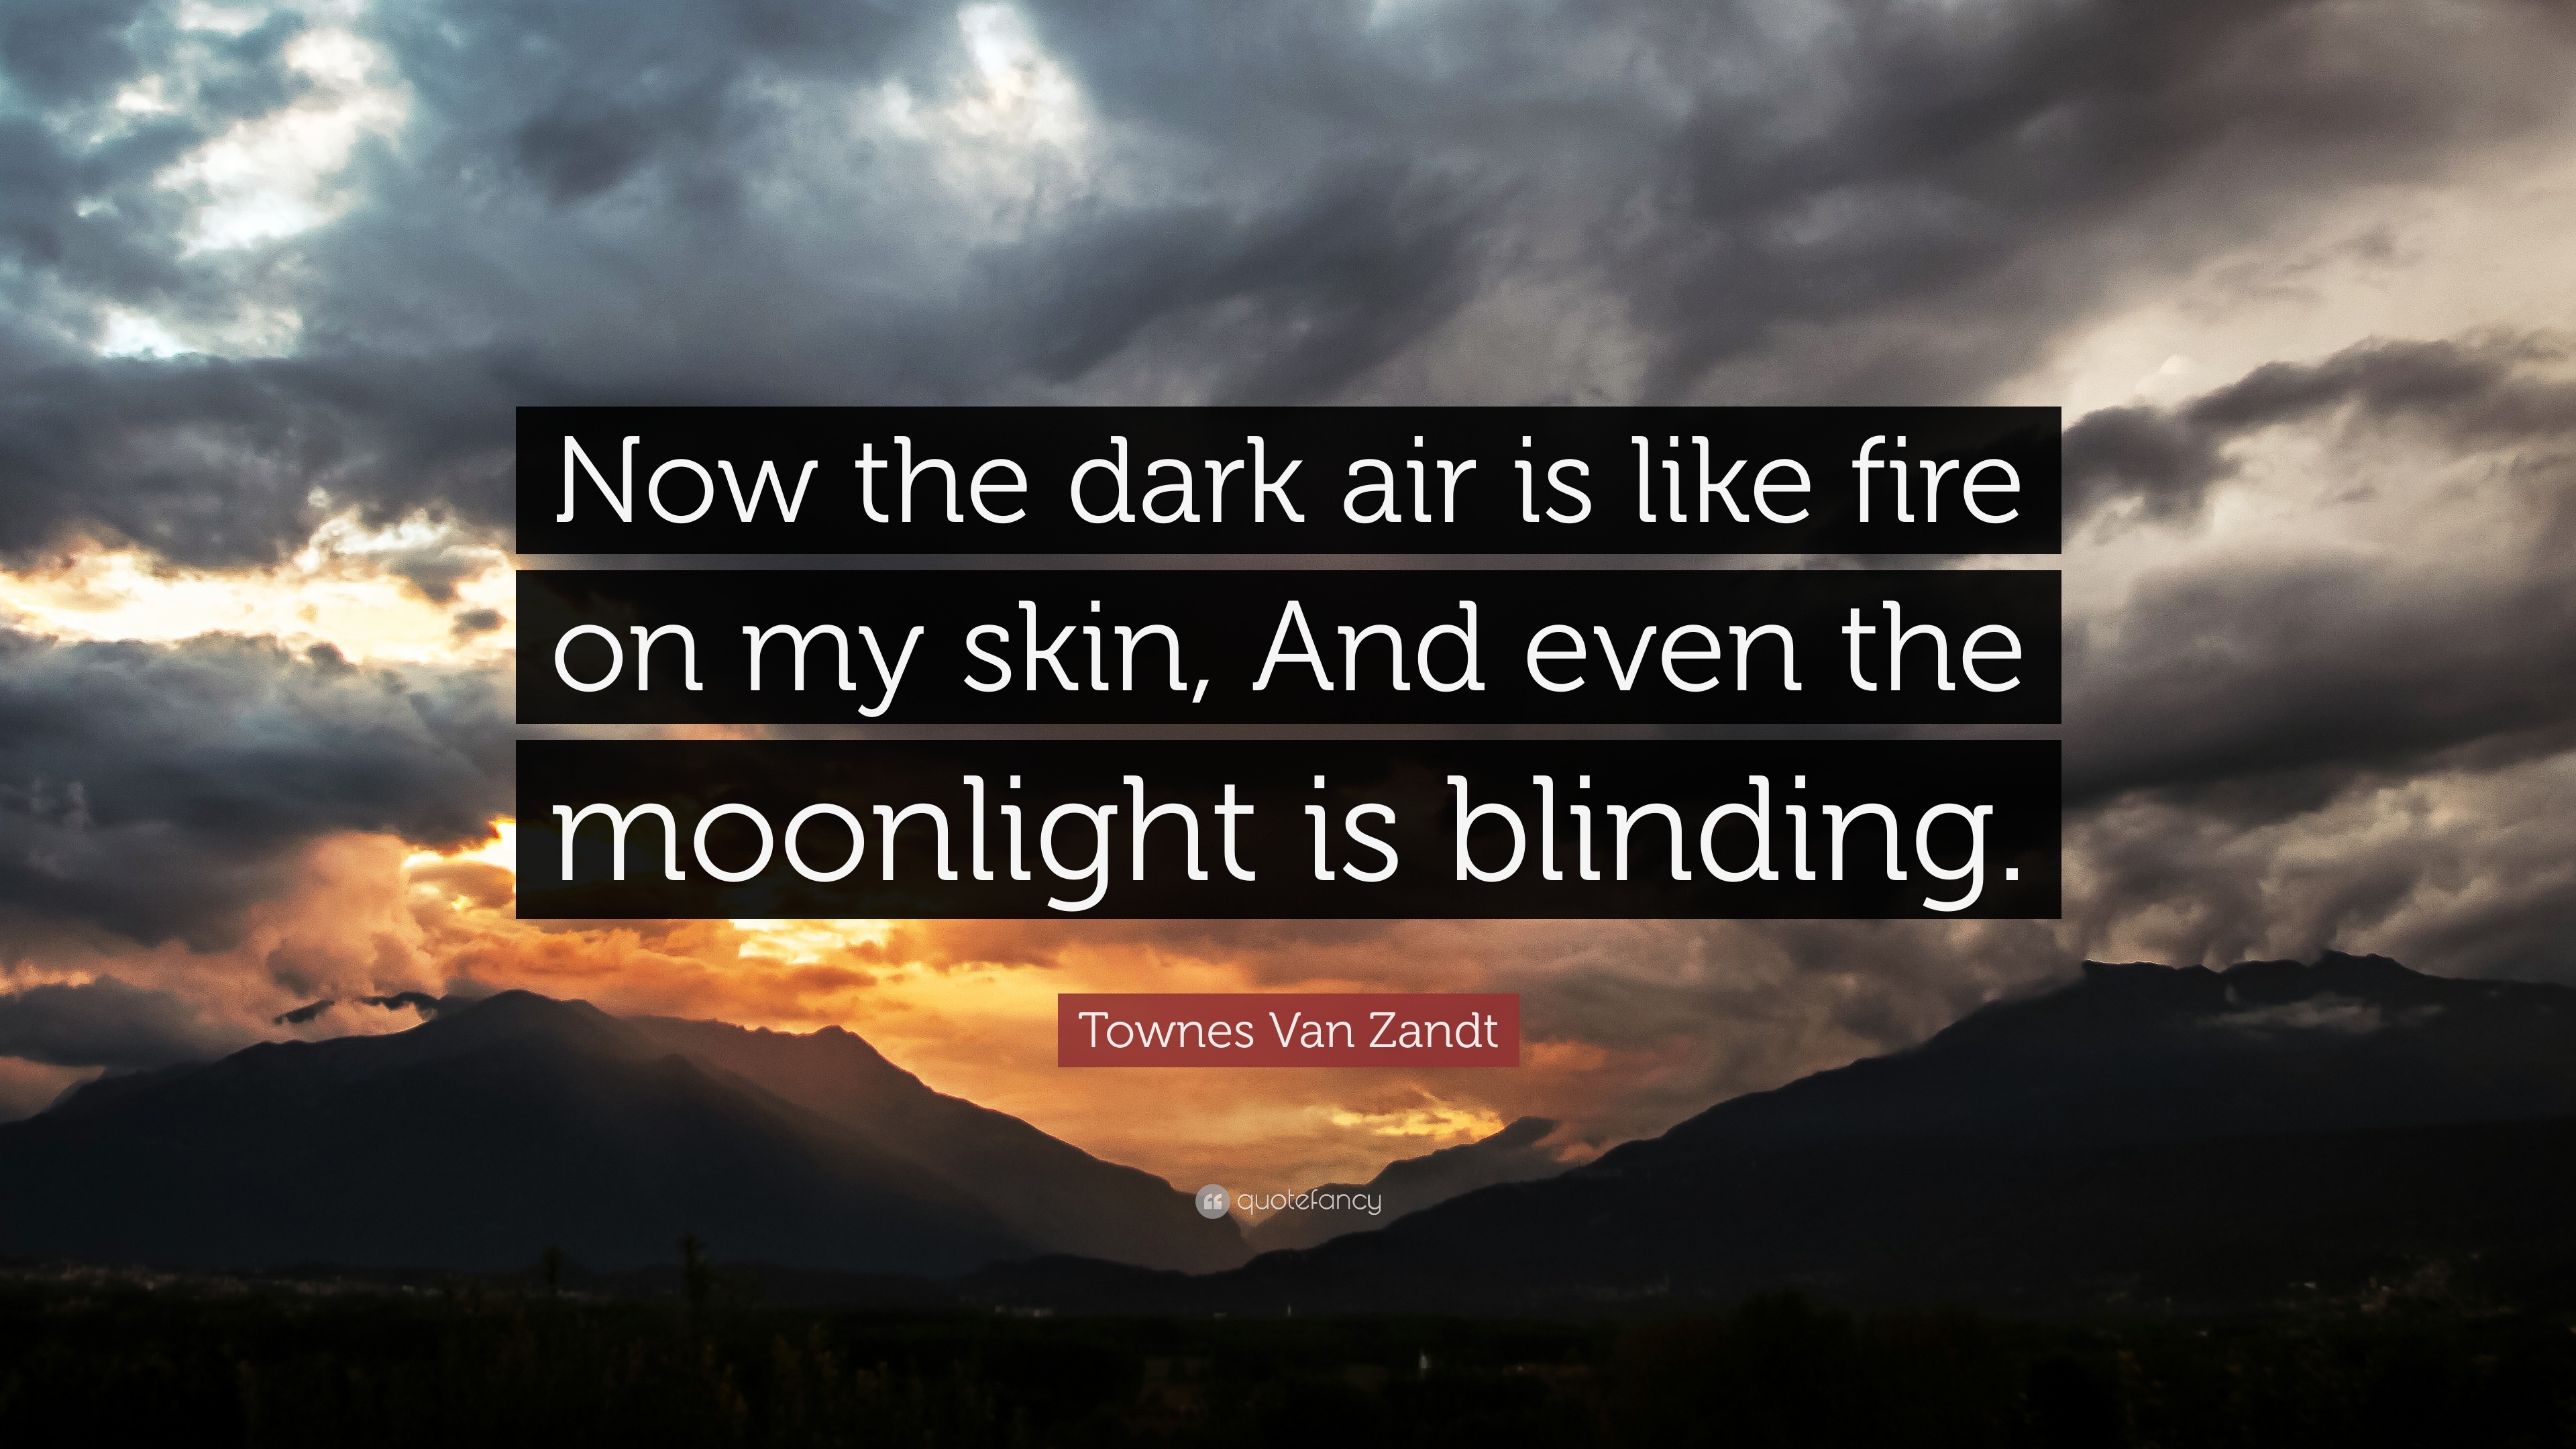 Townes Van Zandt Quote “Now the dark air is like fire on my skin